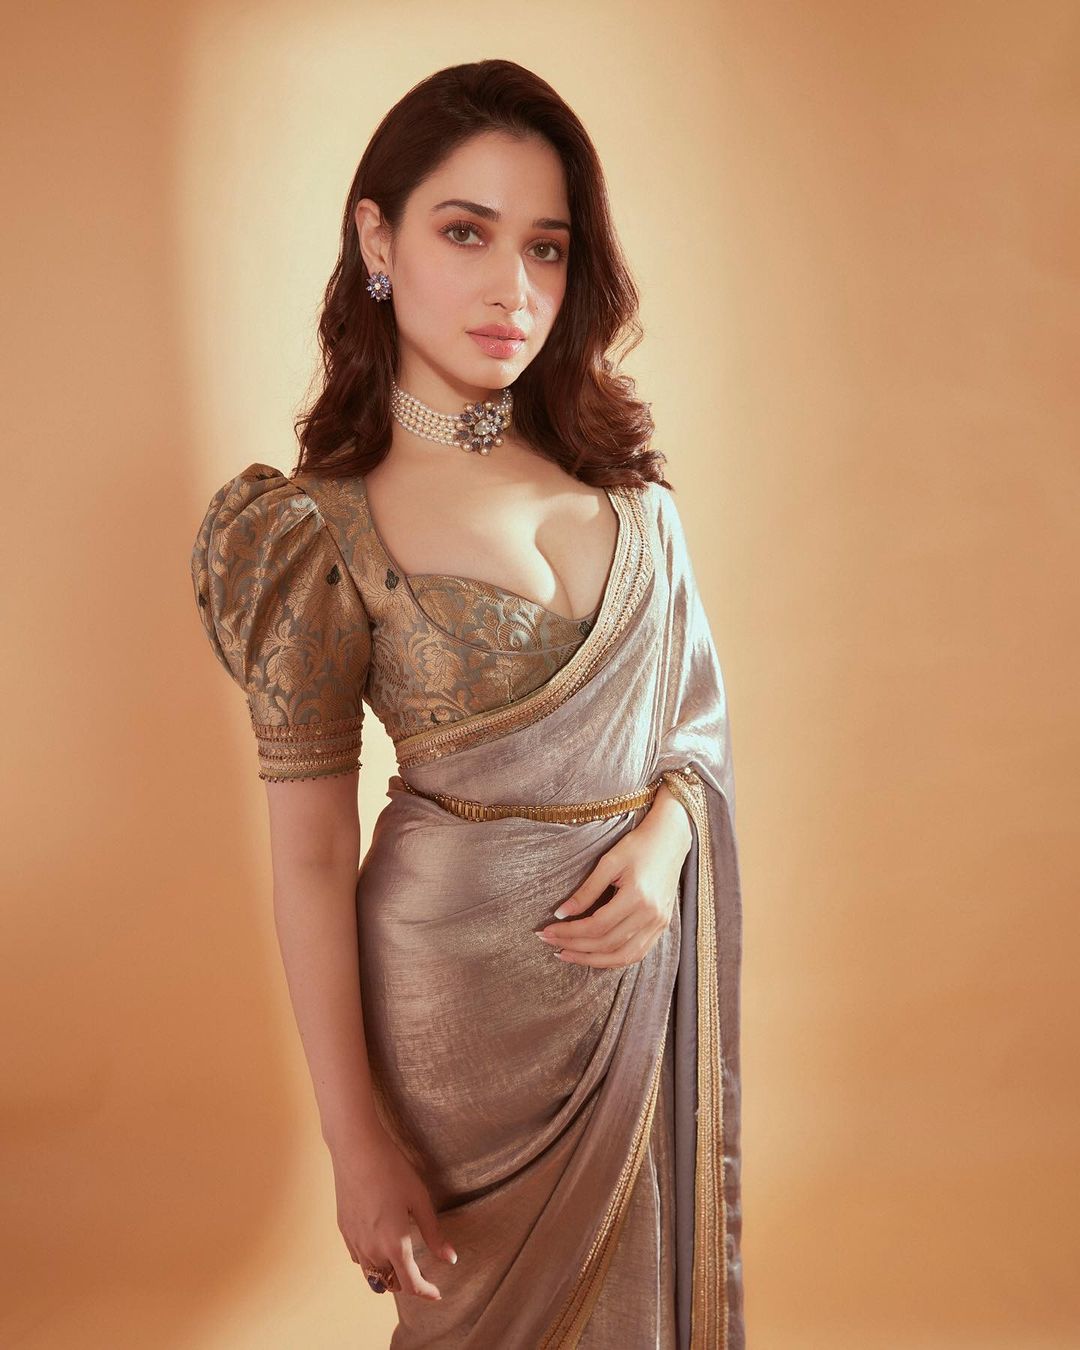 Did you notice Tamannaah Bhatia's sexy brocade blouse? Check out her look  if you love cocktail-ready drapes | PINKVILLA